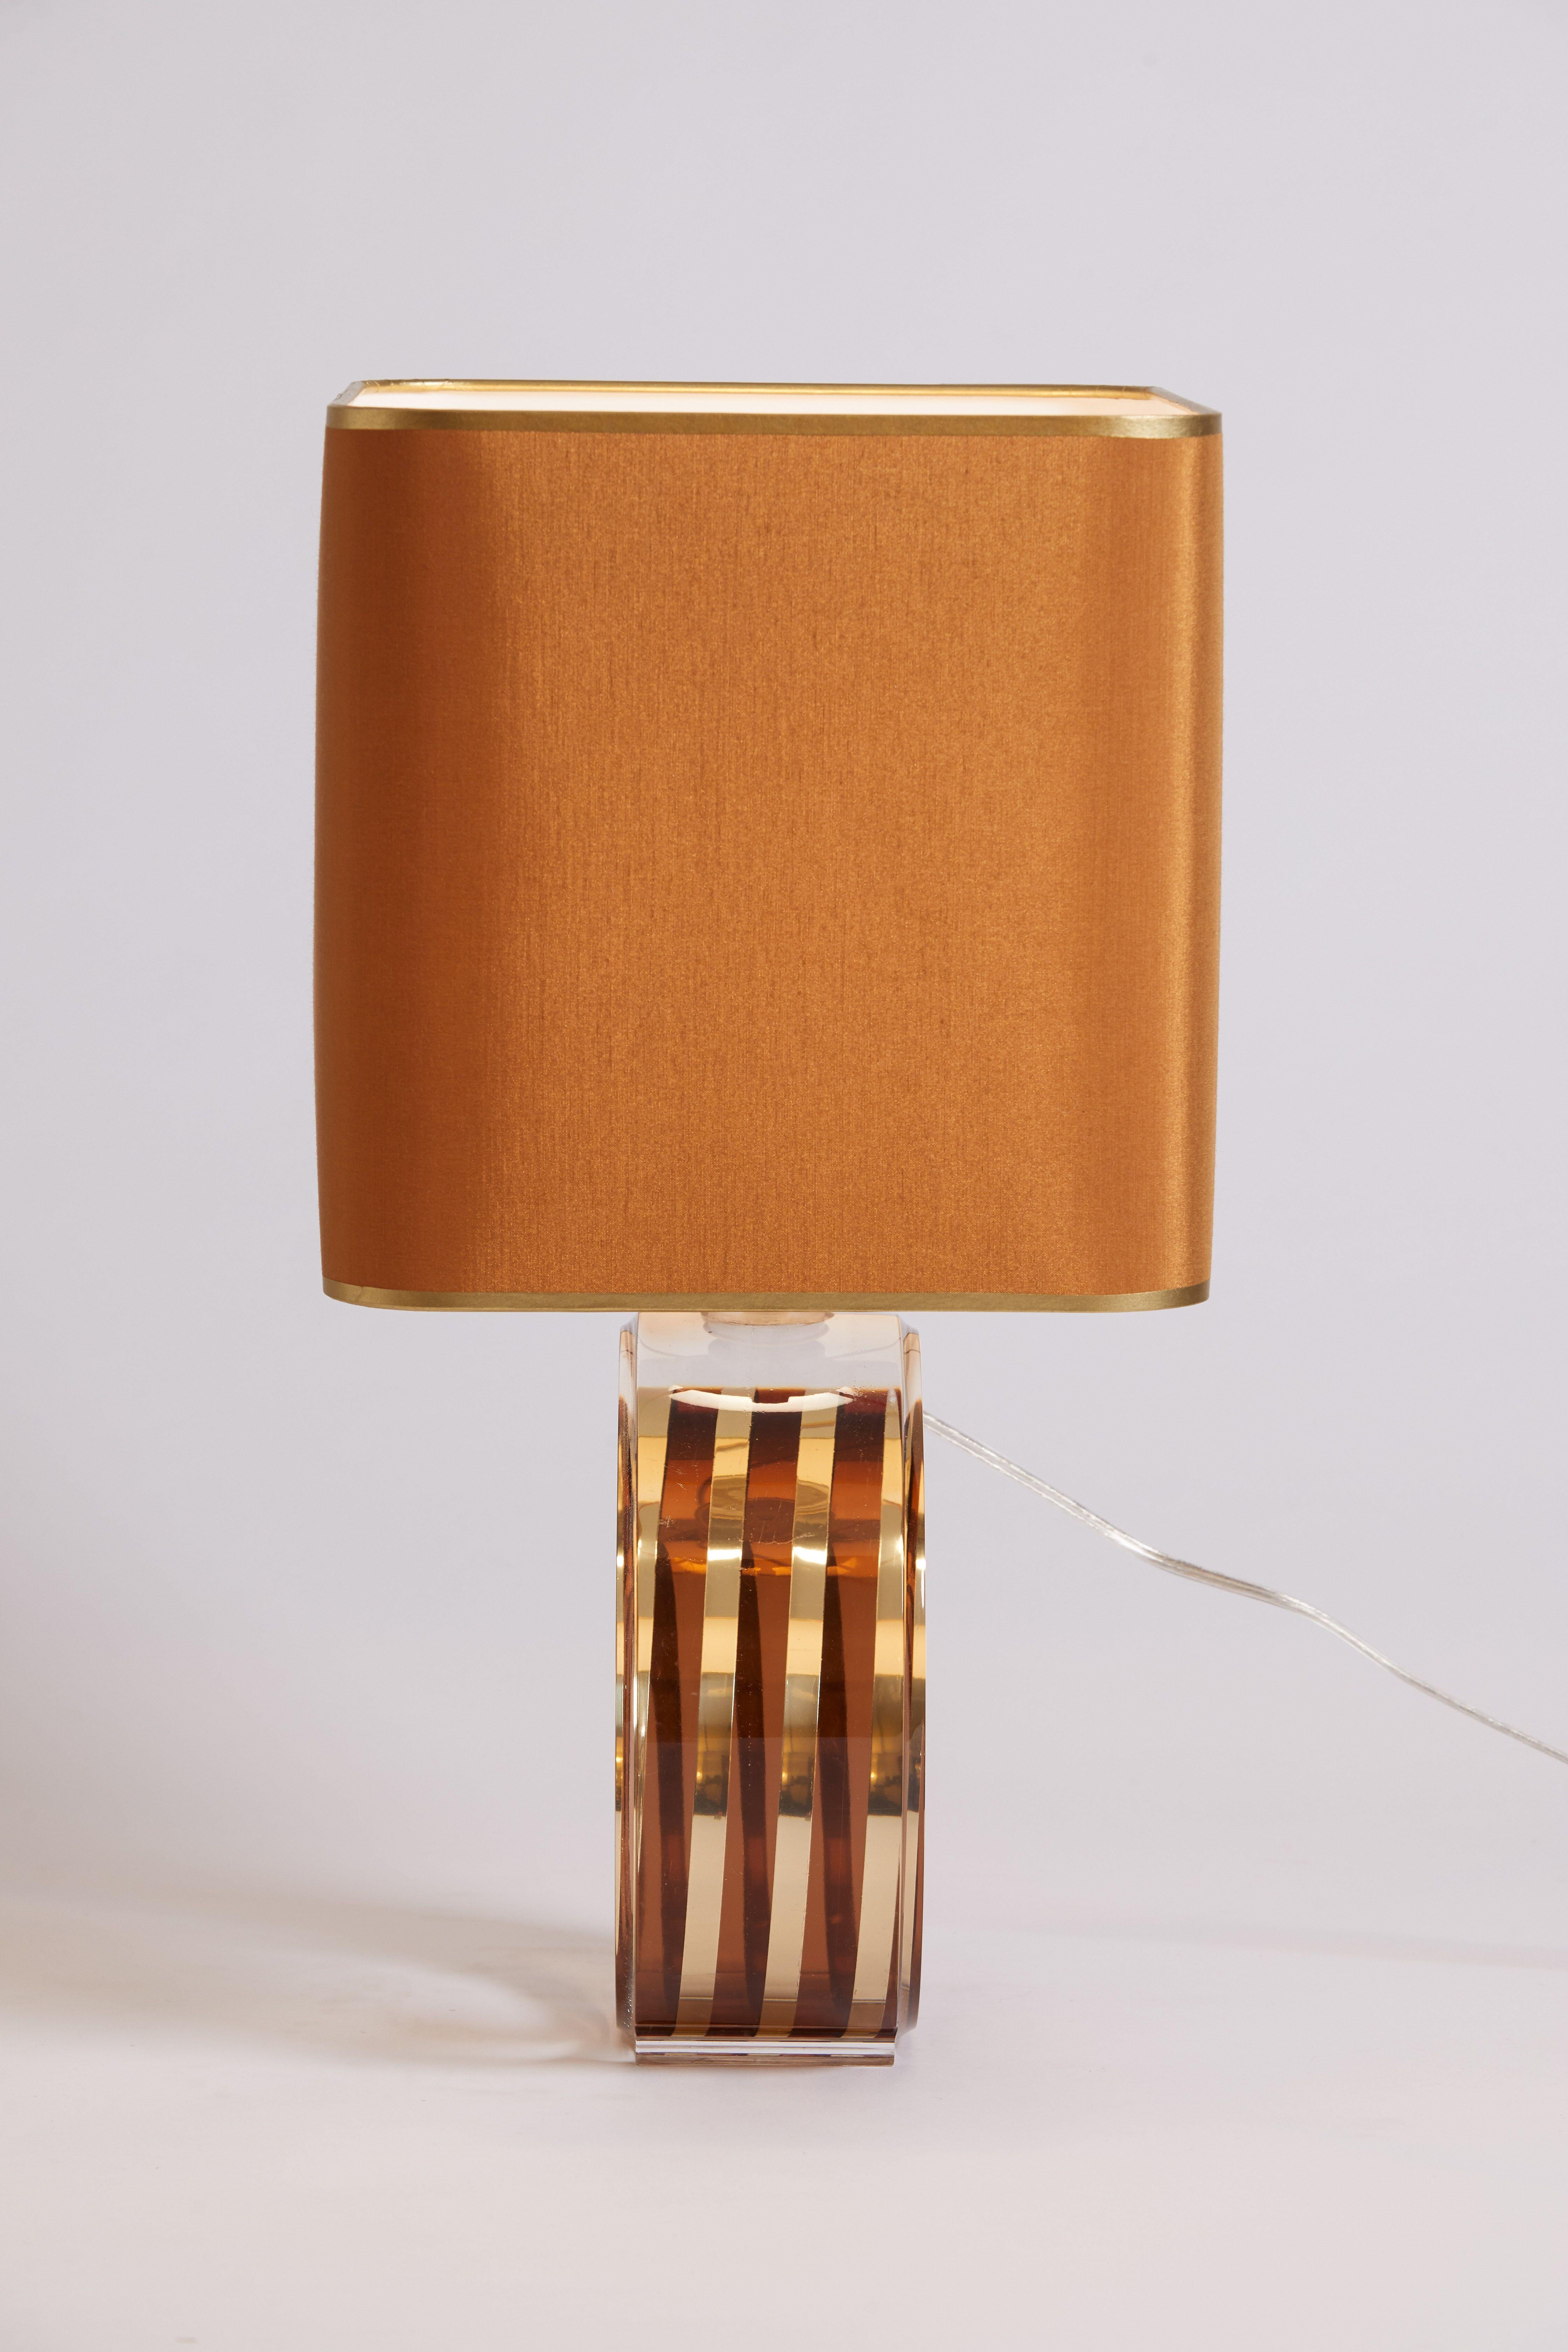 1970s Italian Lucite and Brass Artistic Table Lamp 1